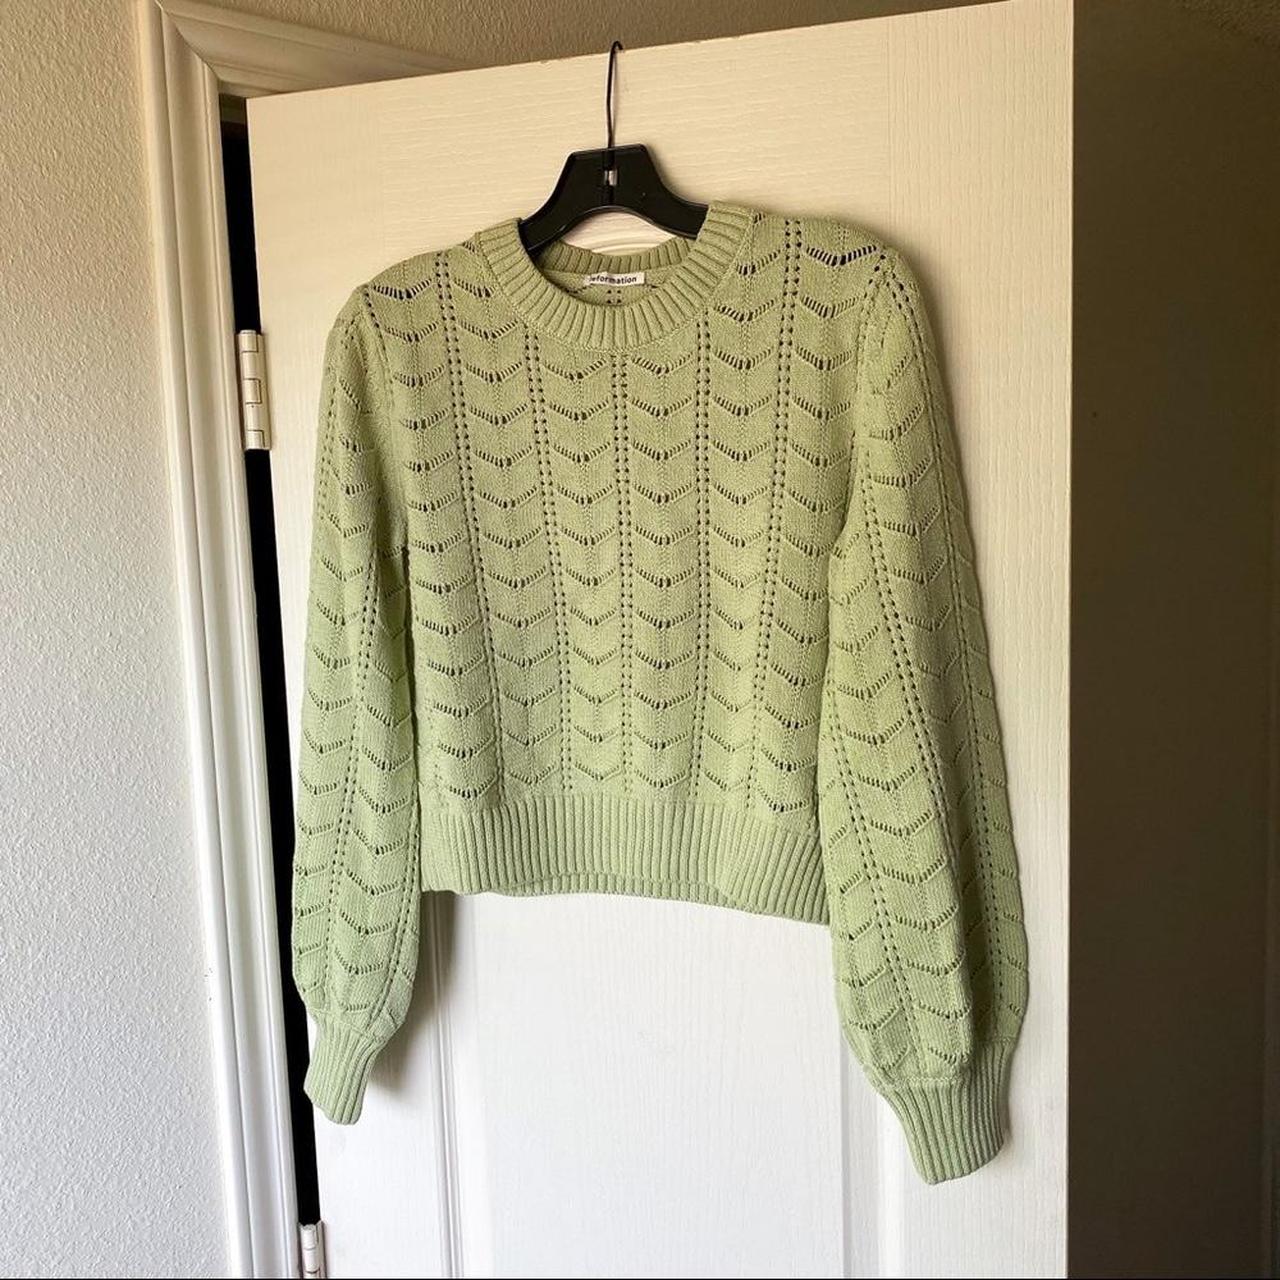 REFORMATION Champs Pointelle Sweater Color: idk... - Depop